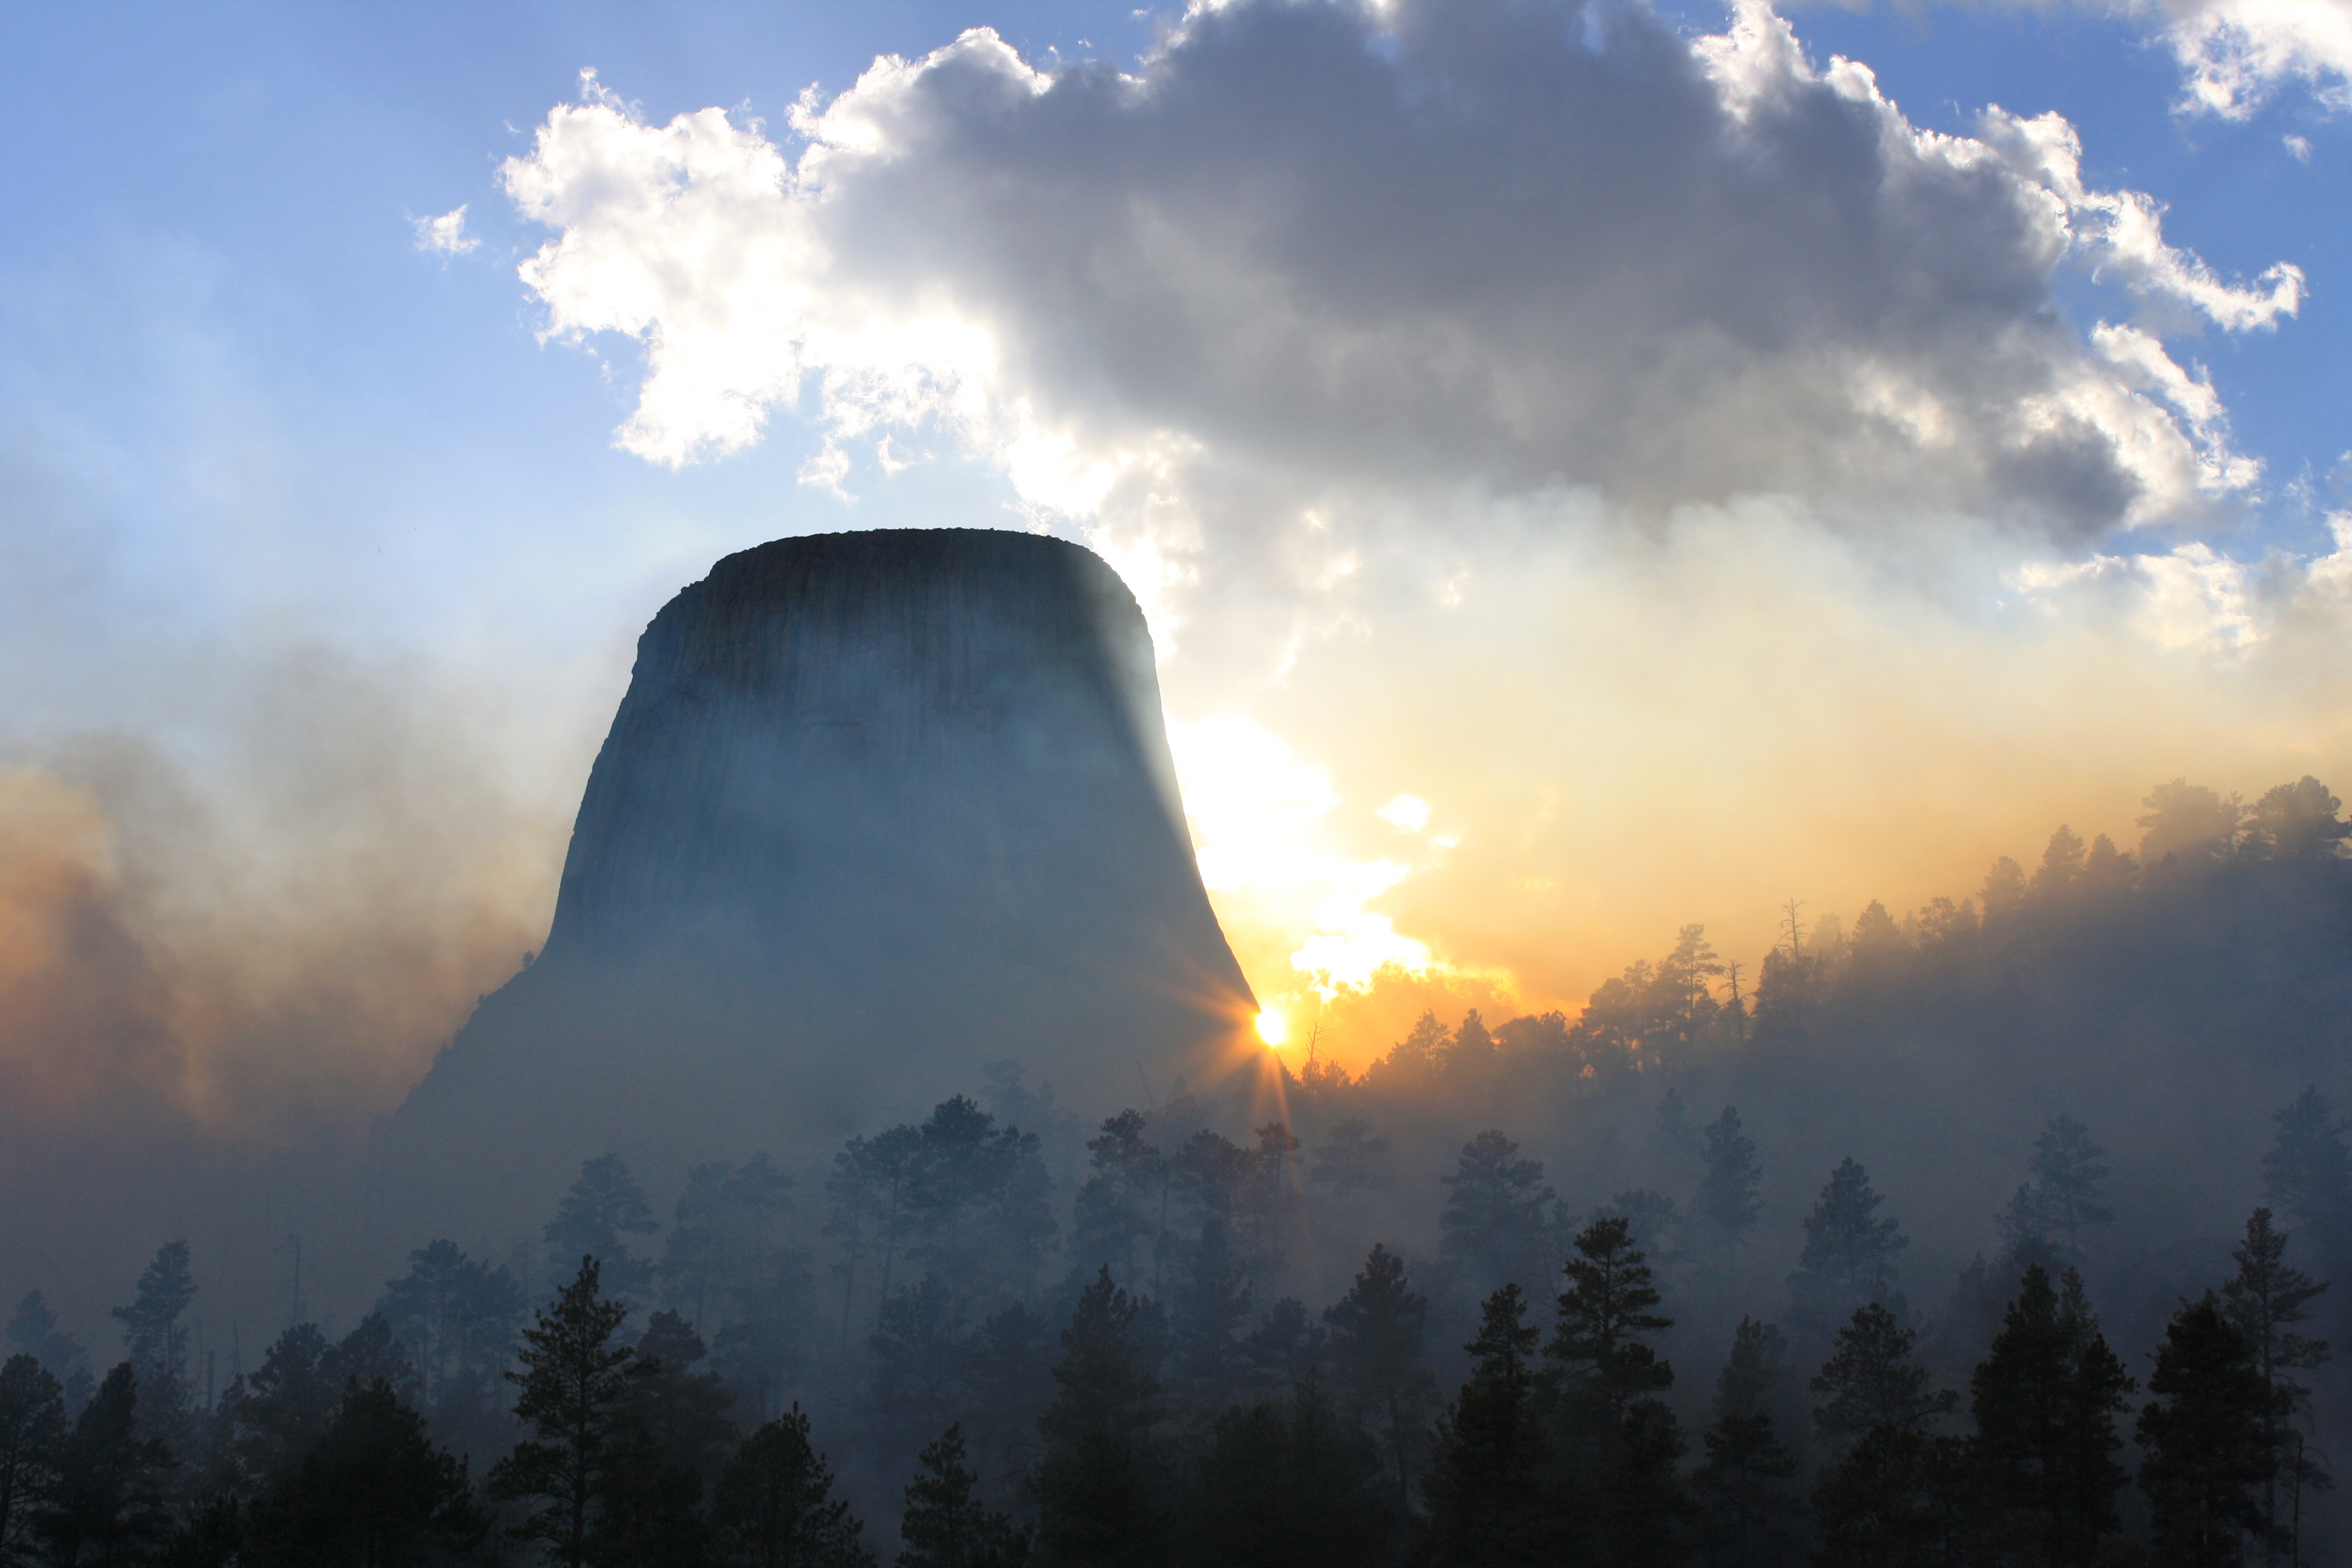 General 3888x2592 landscape fog mist nature trees sunlight clouds Wyoming mountains Devils Tower